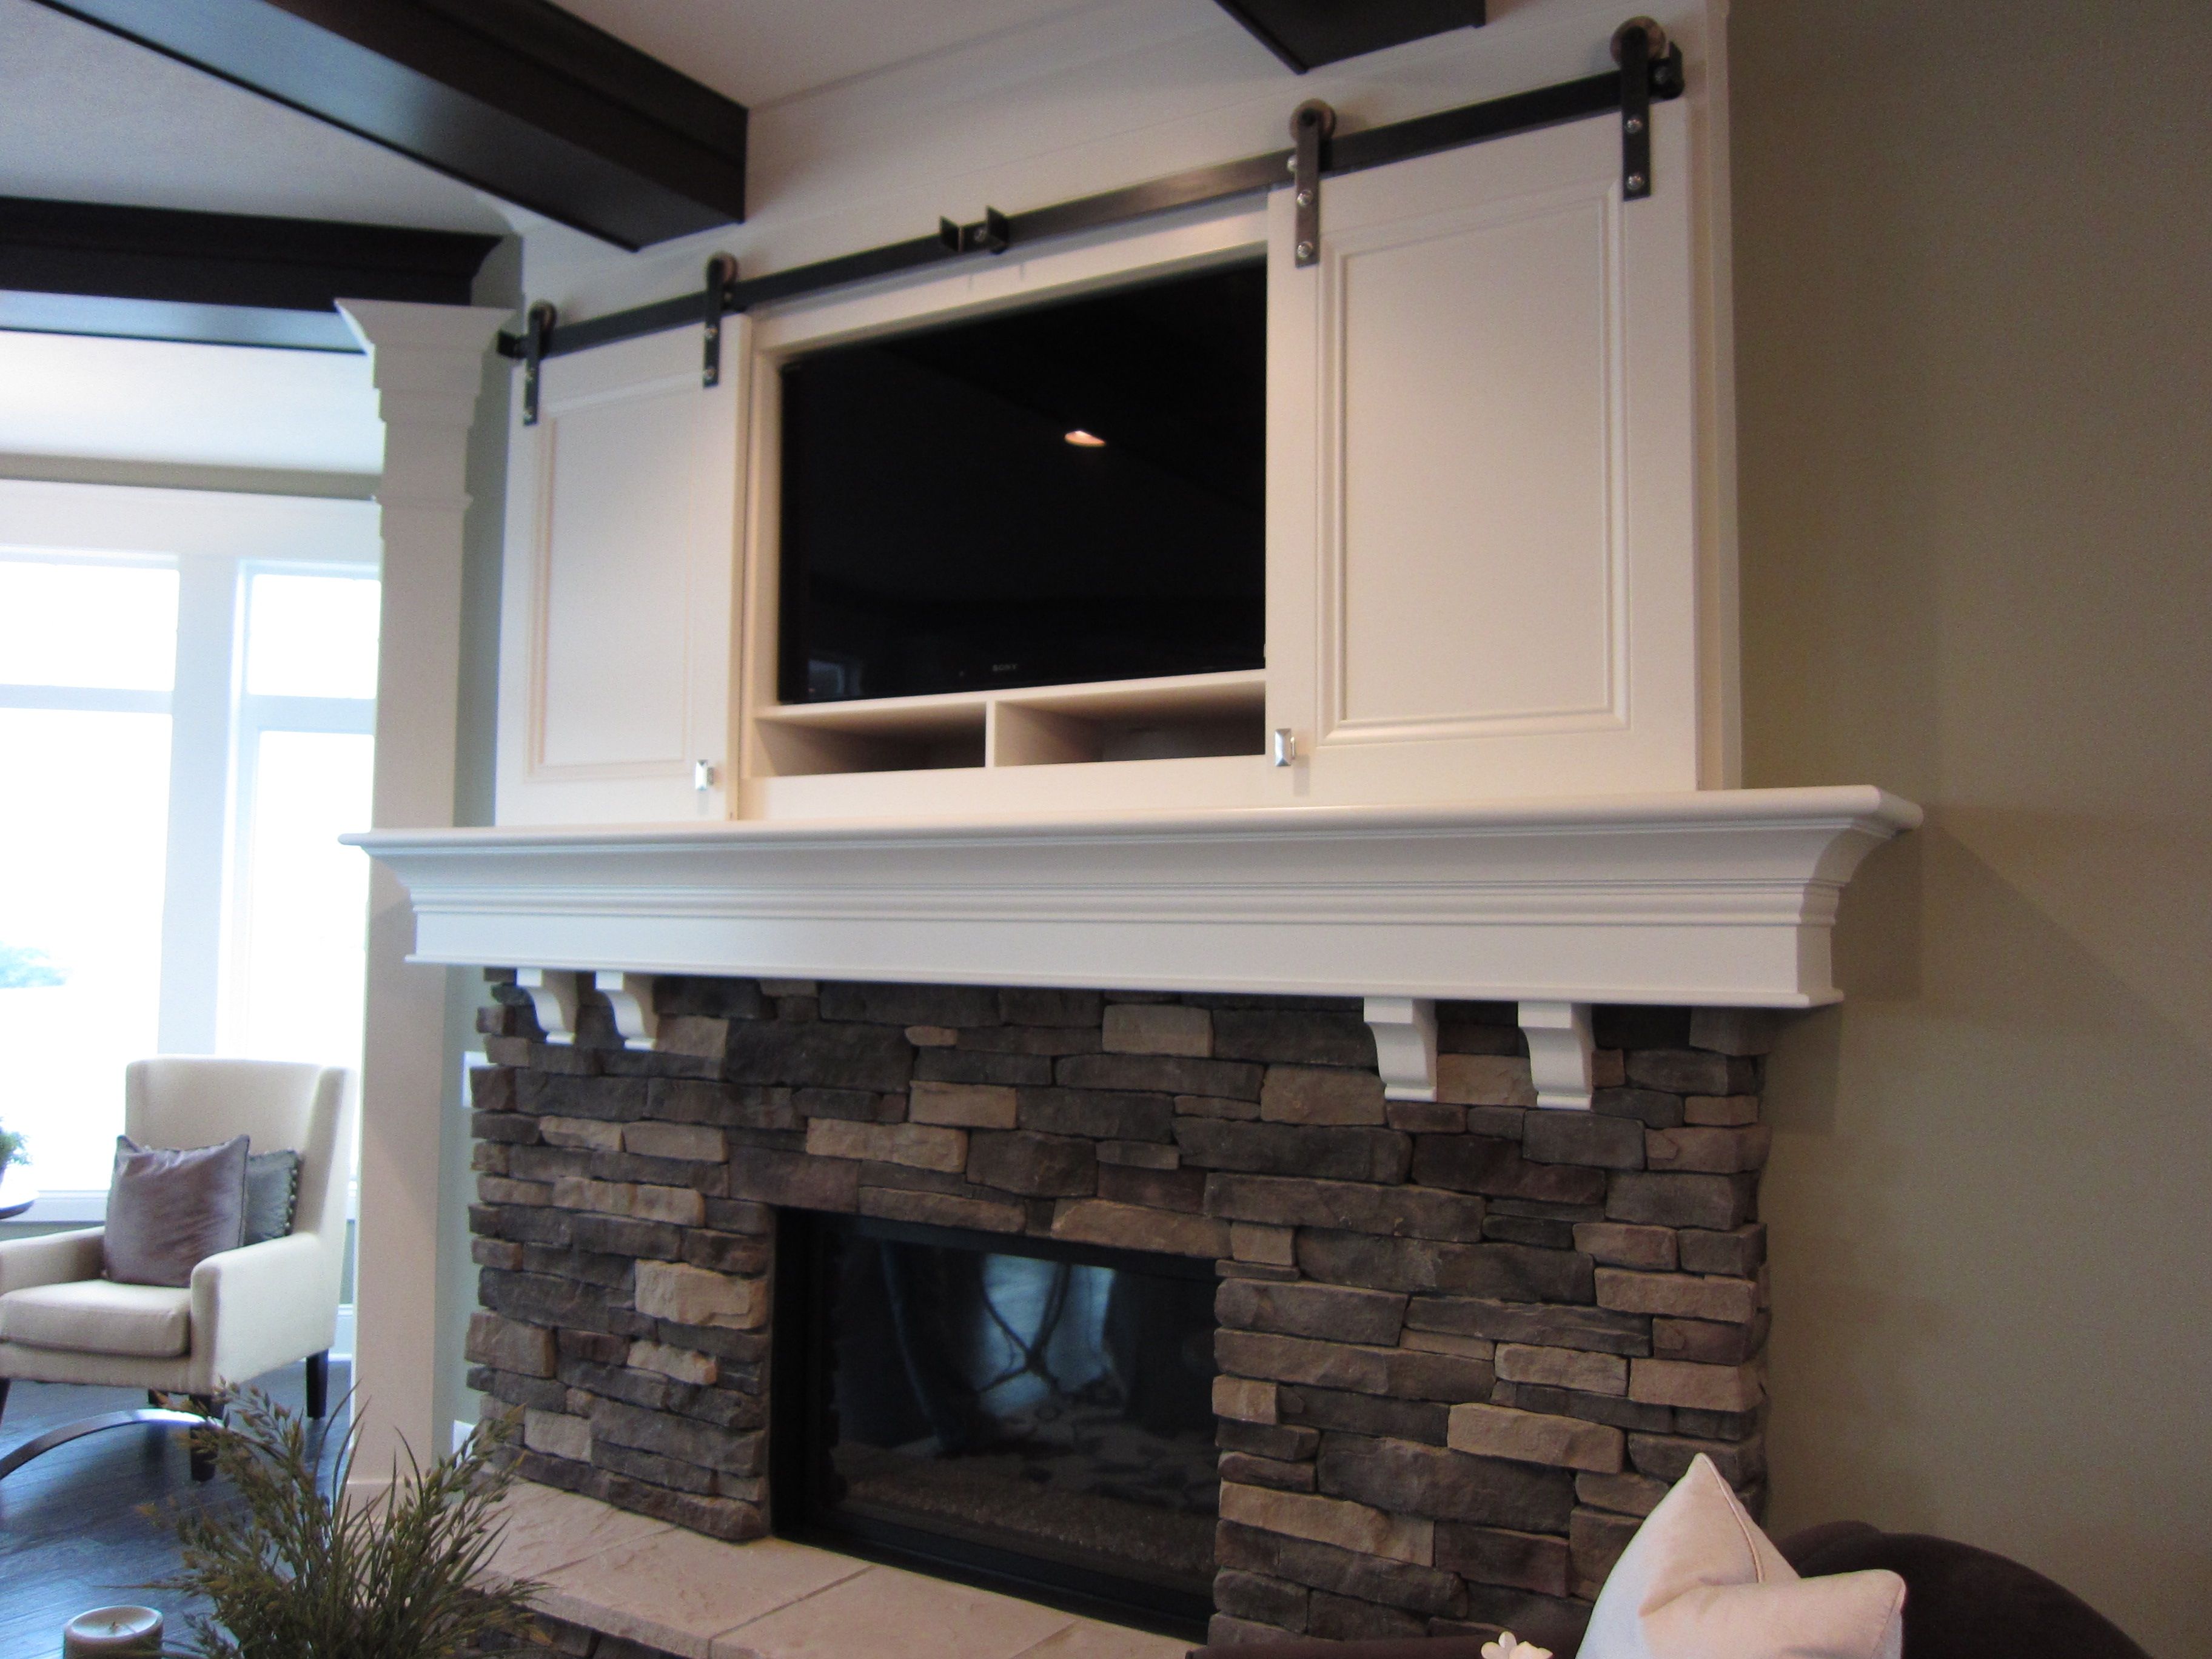 What to Put Above Fireplace Beautiful Fireplace Tv Mantel Ideas Best 25 Tv Above Fireplace Ideas